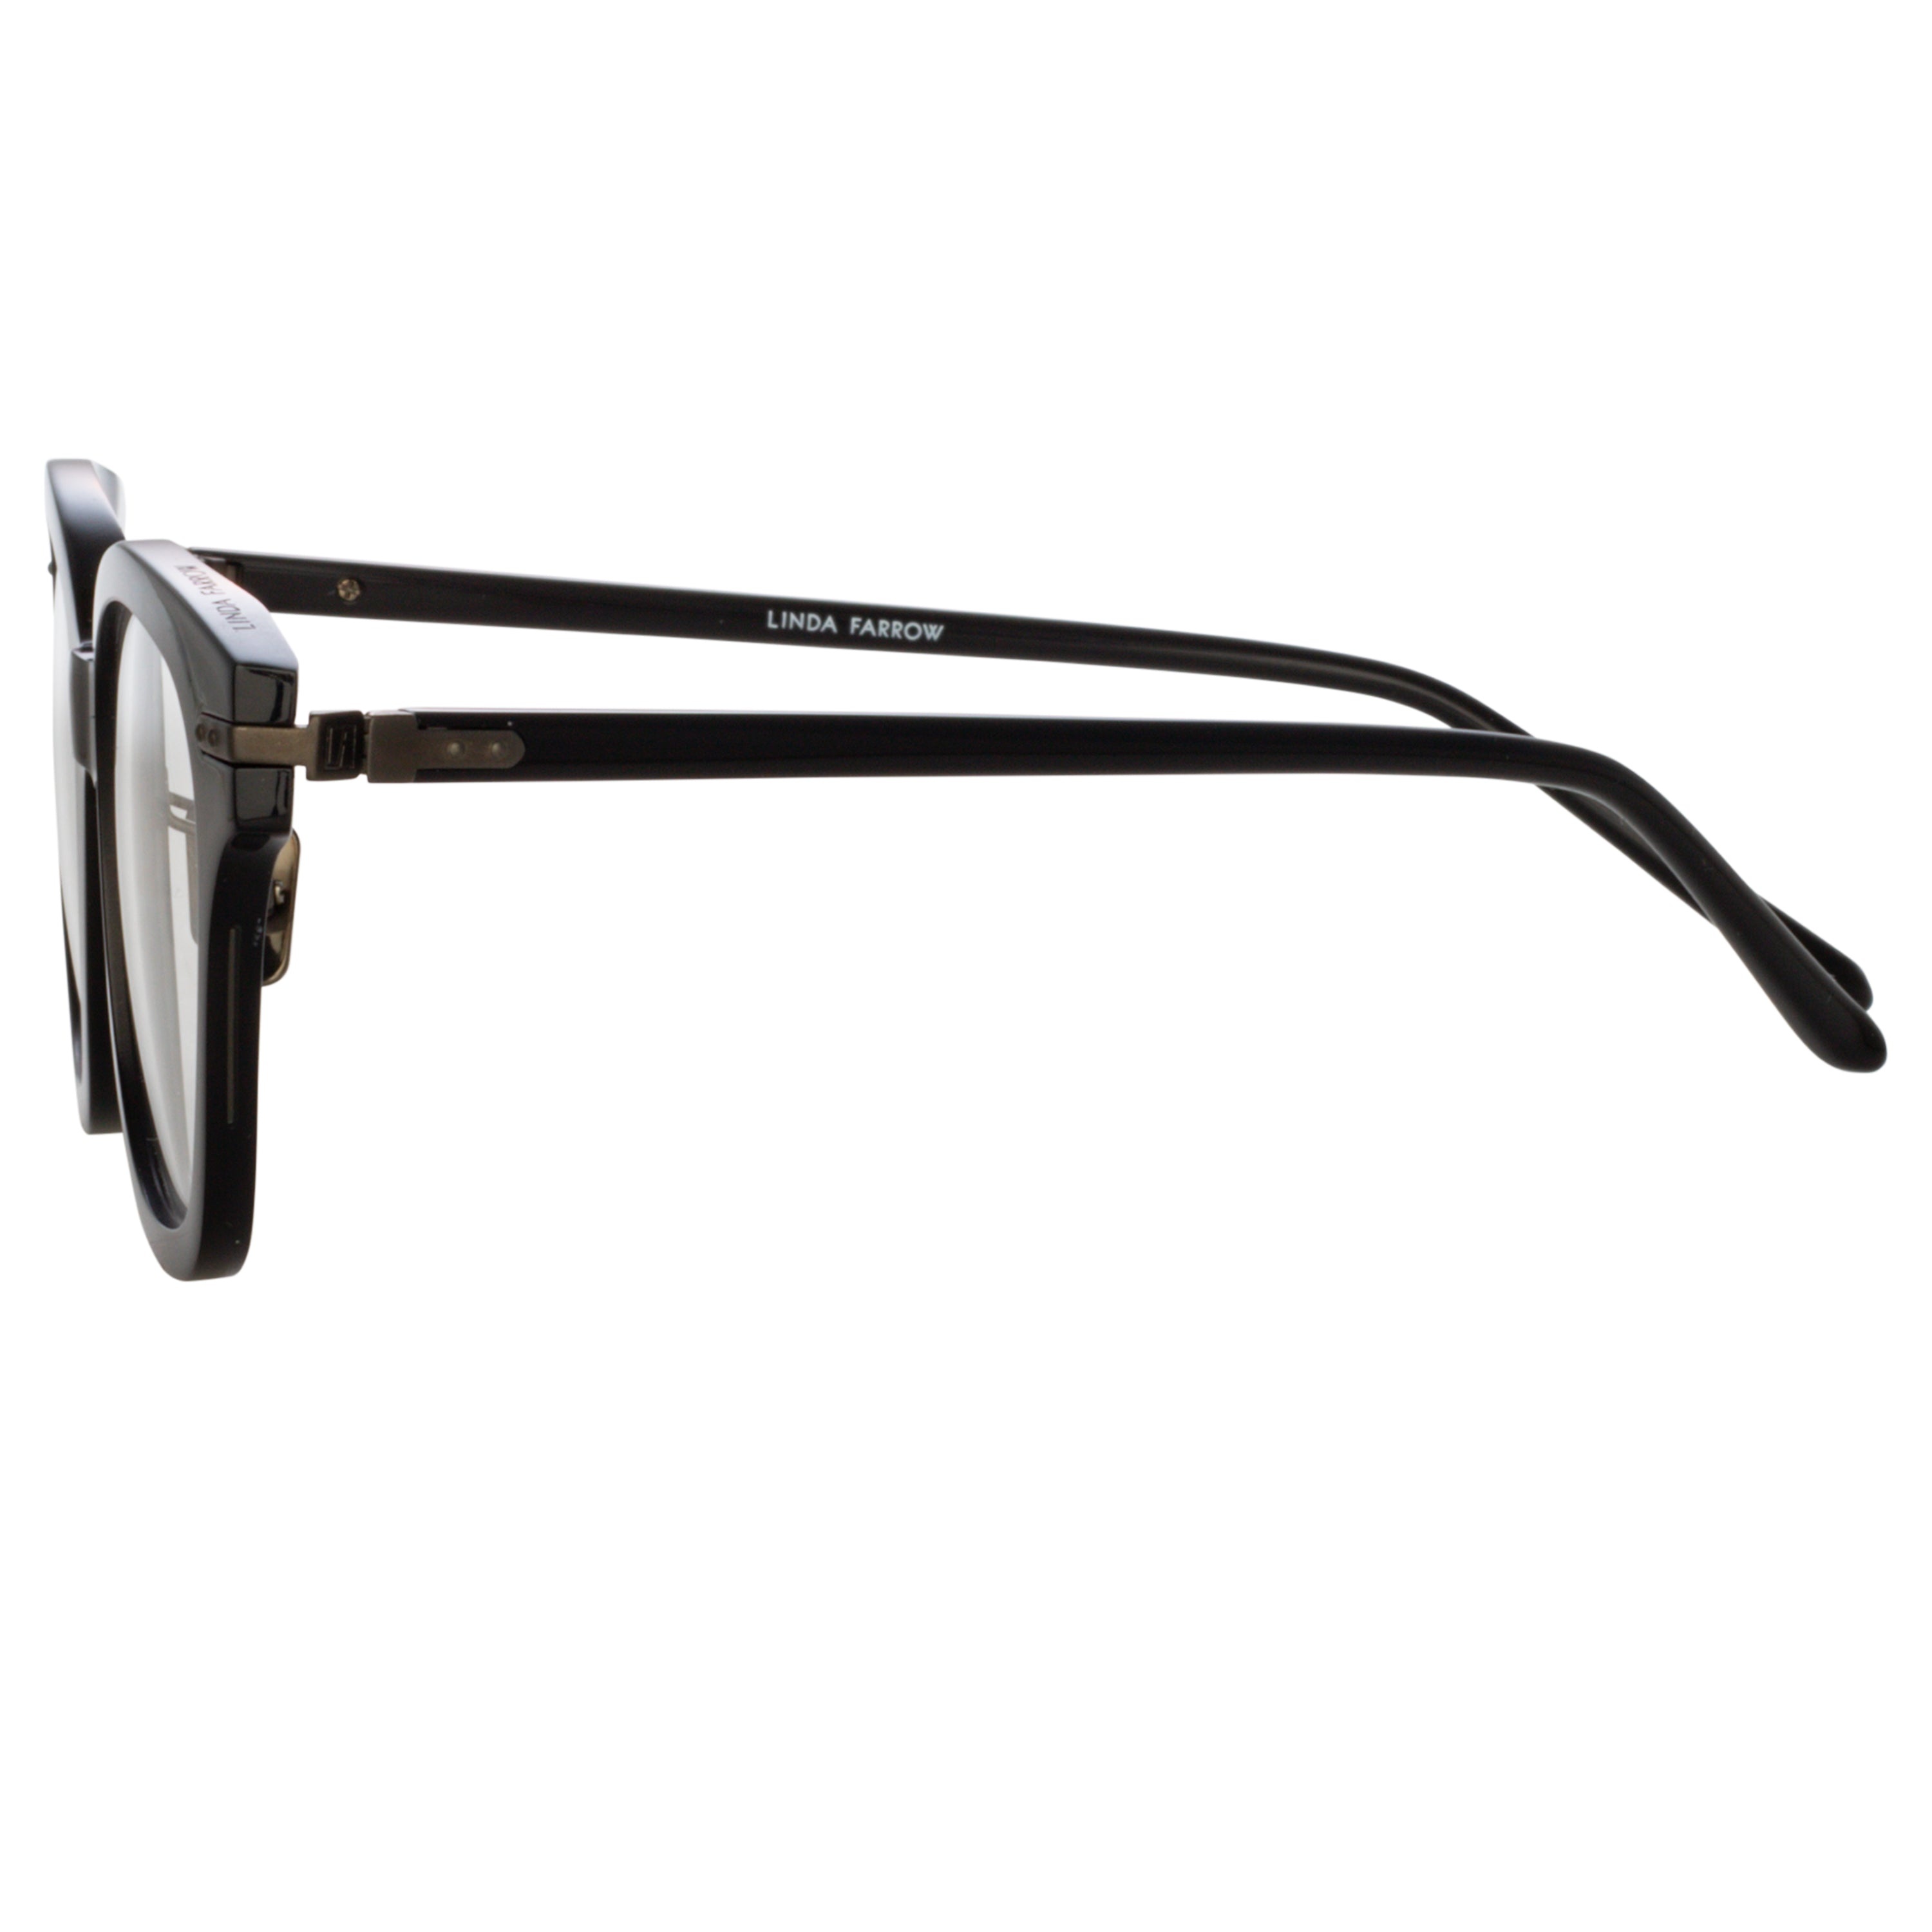 ATKINS A OPTICAL D-FRAME IN BLACK (ASIAN FIT) - 4